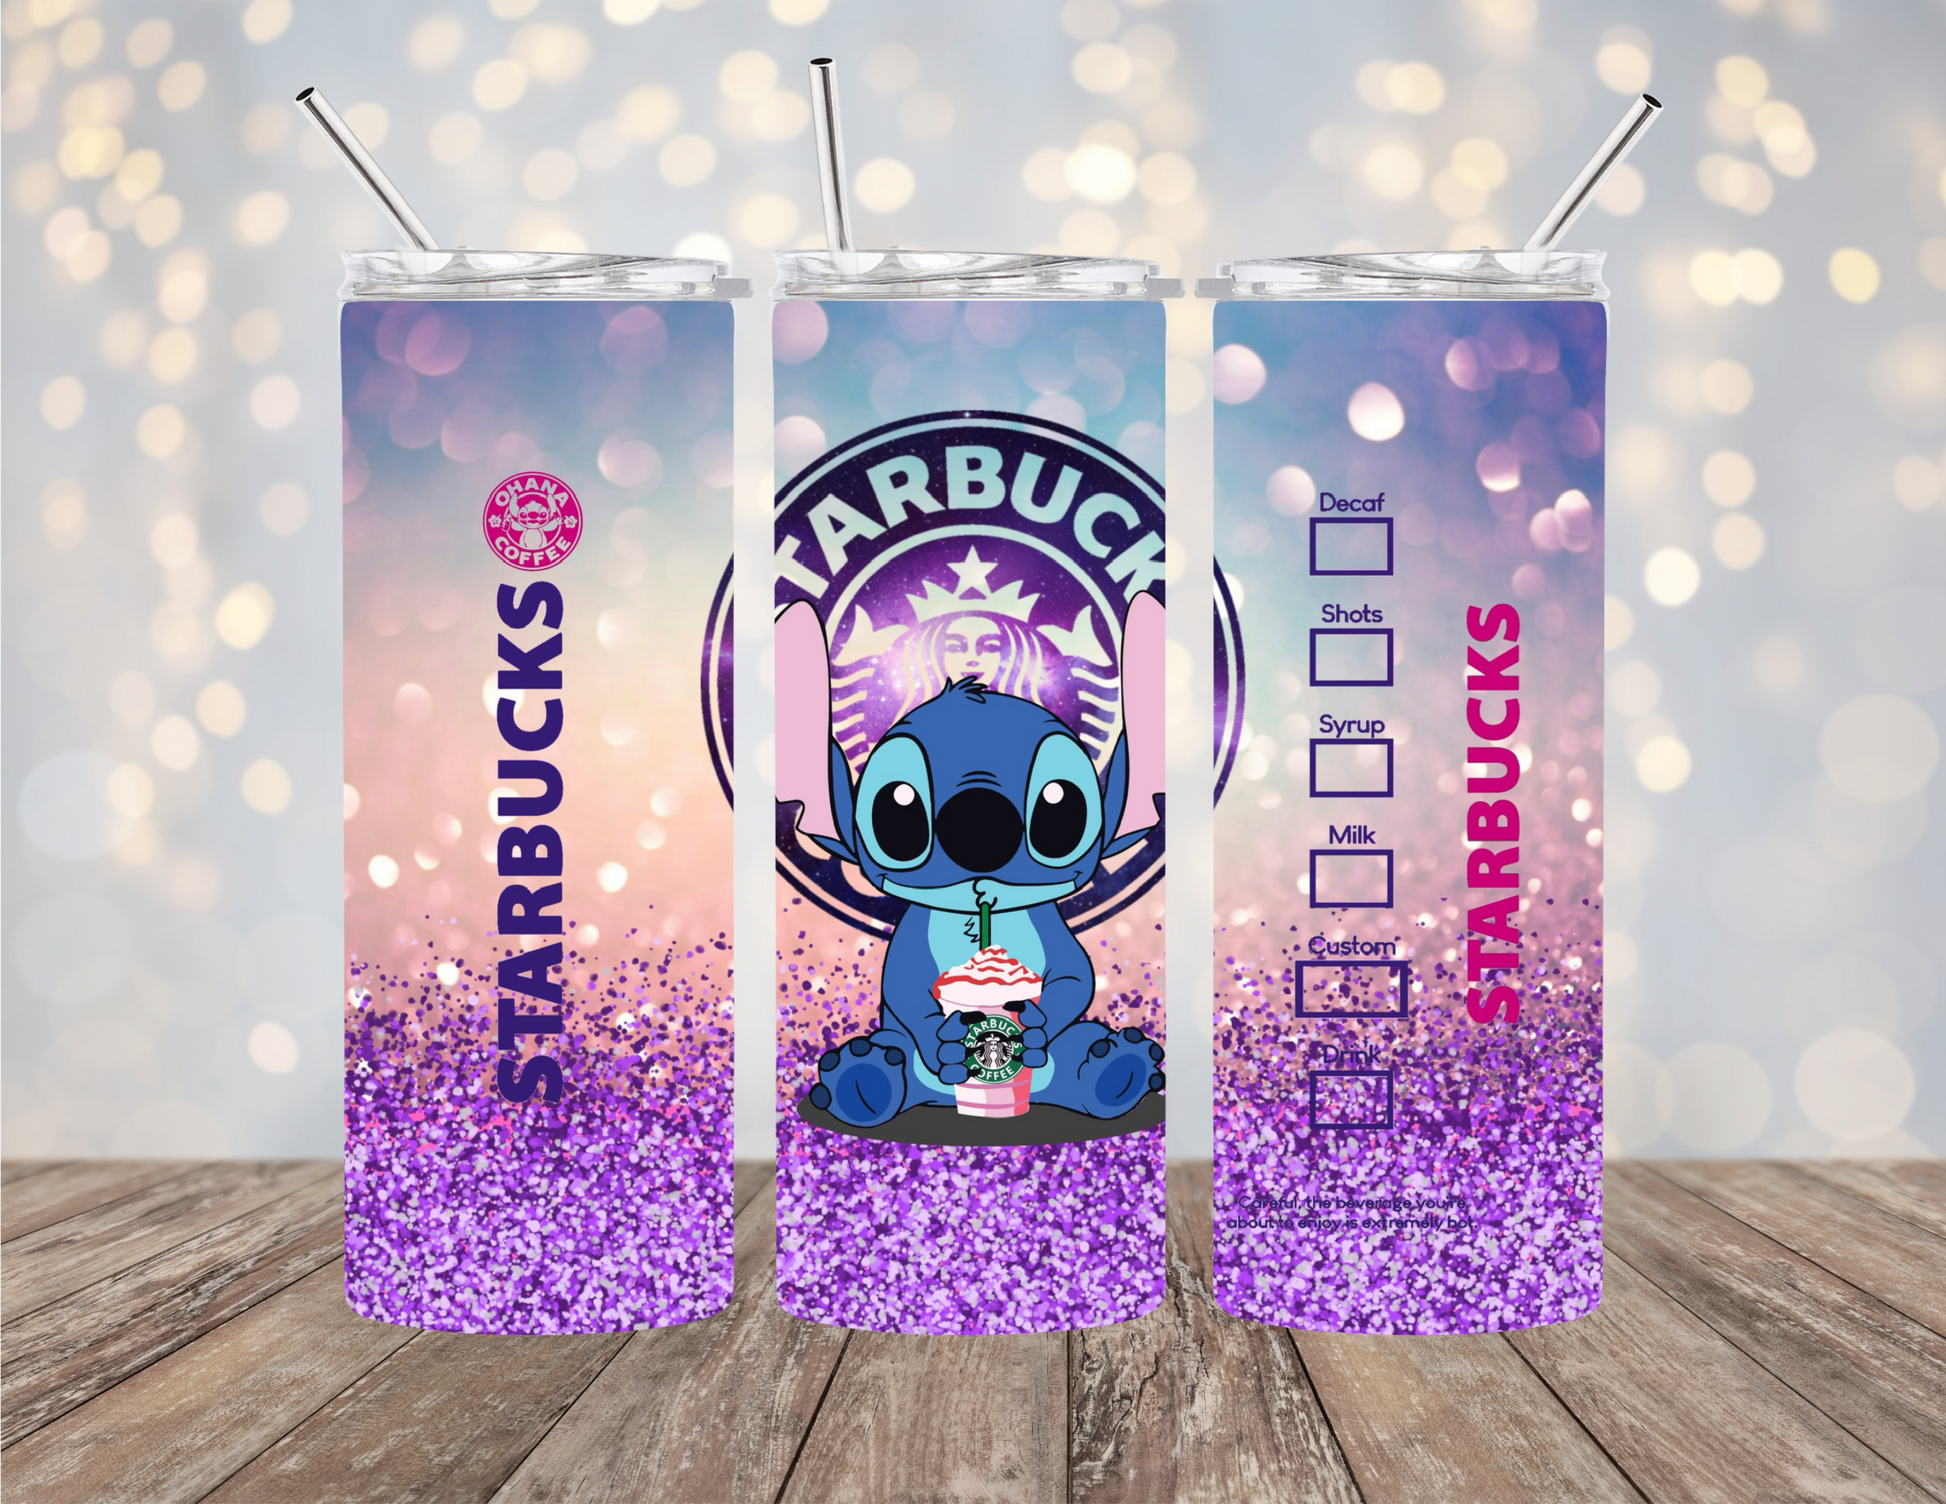 Stitch Starbucks Tumbler is available now! 💙 #stitch #disney #liloand